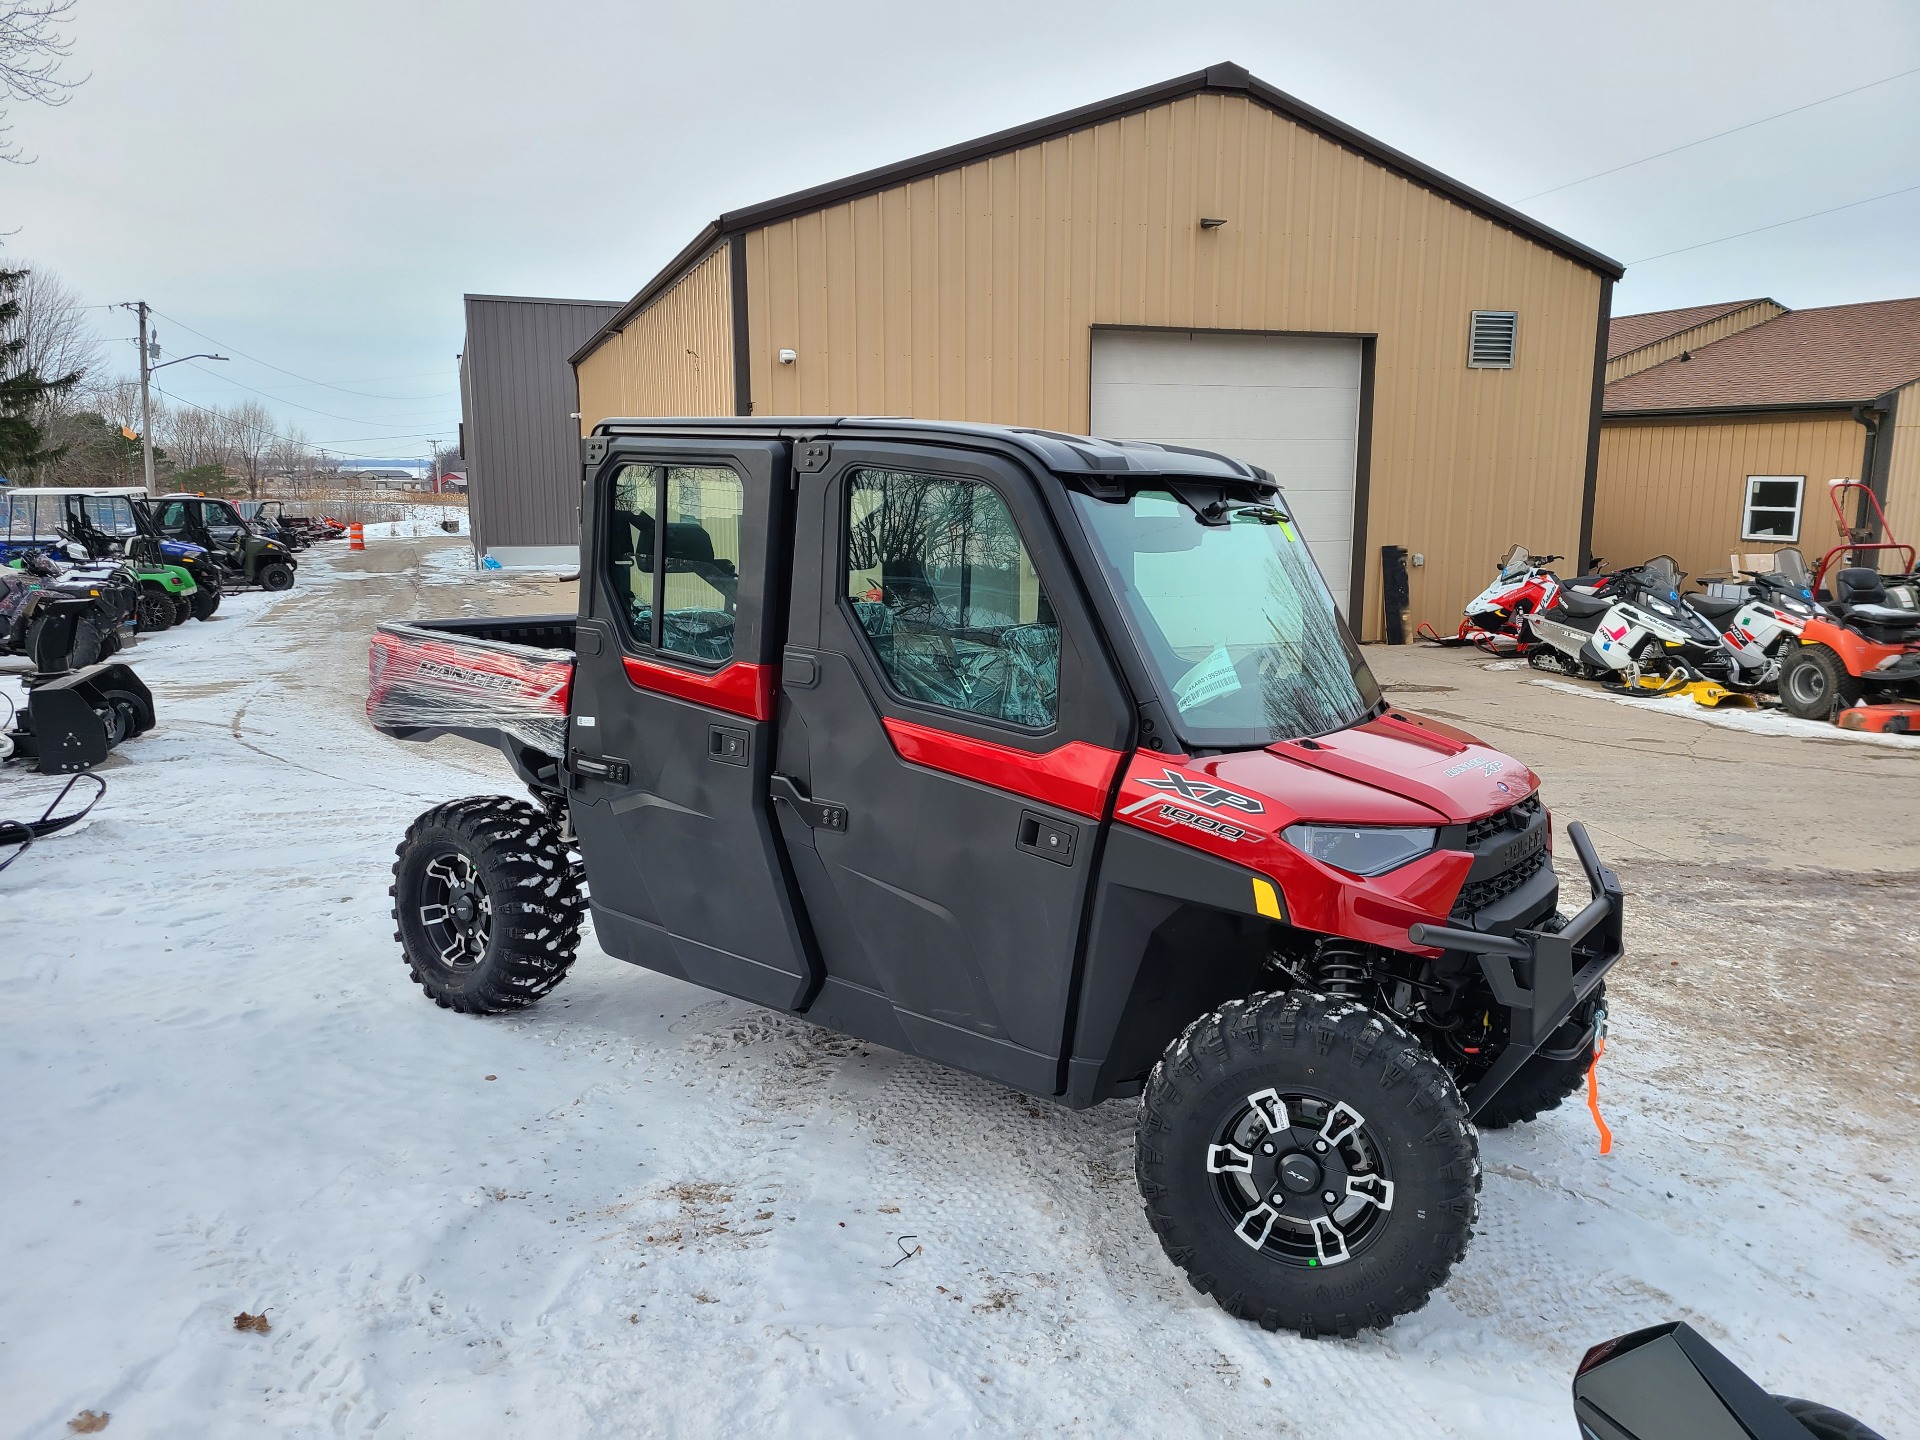 2022 Polaris Ranger Crew XP 1000 NorthStar Edition Ultimate - Ride Command Package in Fond Du Lac, Wisconsin - Photo 2